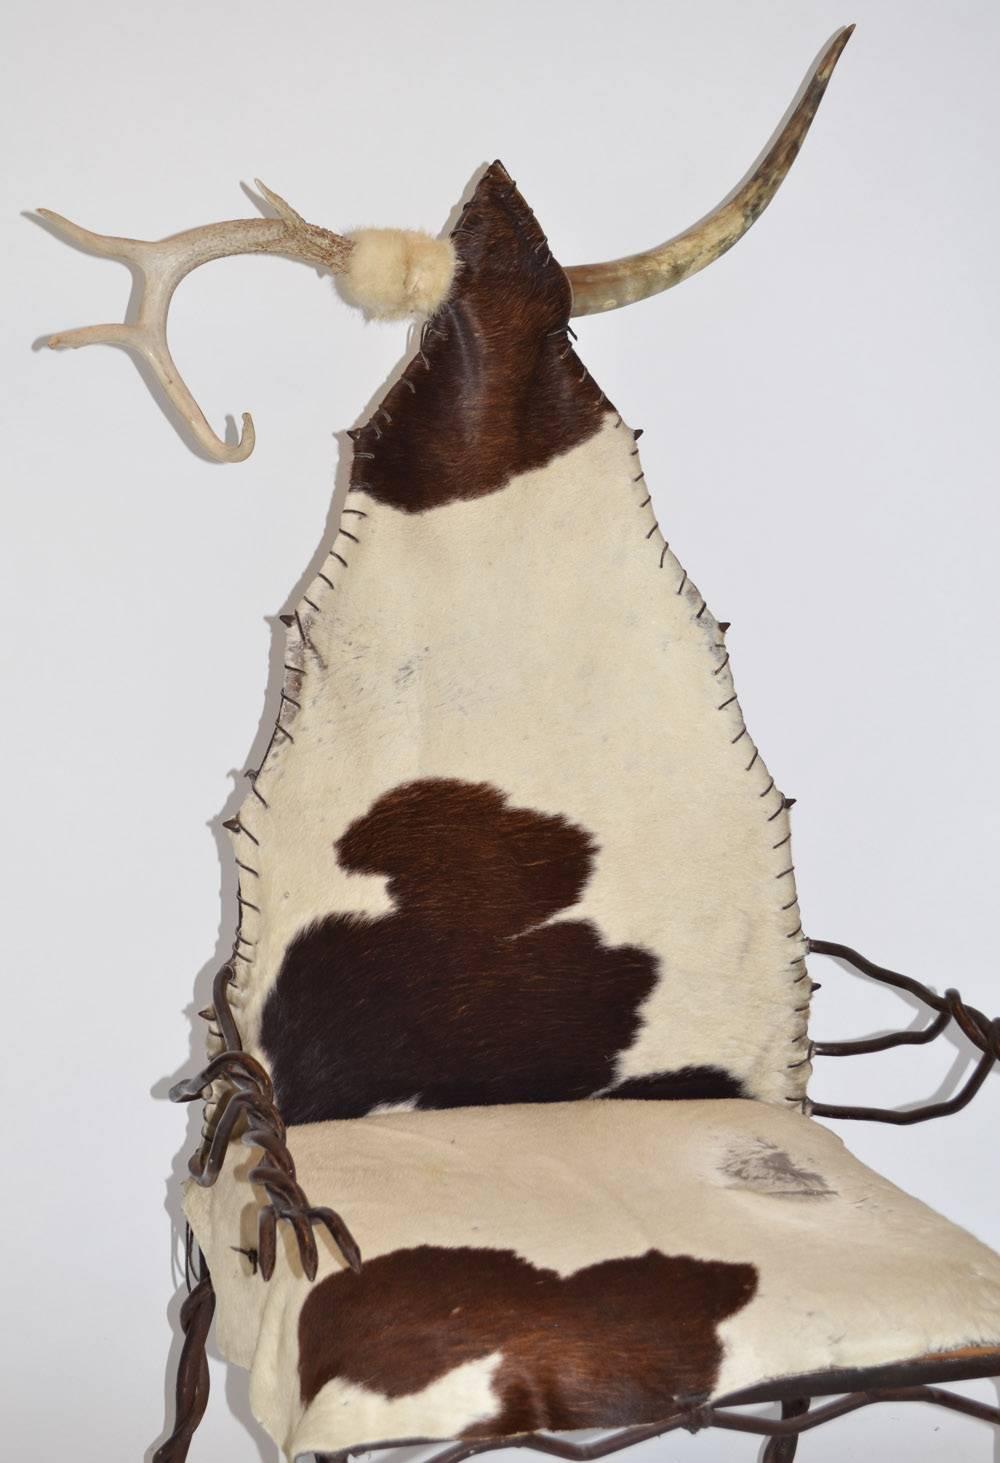 Western Arm or Lounge Chair in Wrought Iron Horn Antler and Cow Hide. One-off Miami Beach 1980's.
Unique, brutalist bizarre, fantasy sculptural furniture ‘Chieftan’ chair in wrought iron, horn, antler and hide reminiscent of the American West or